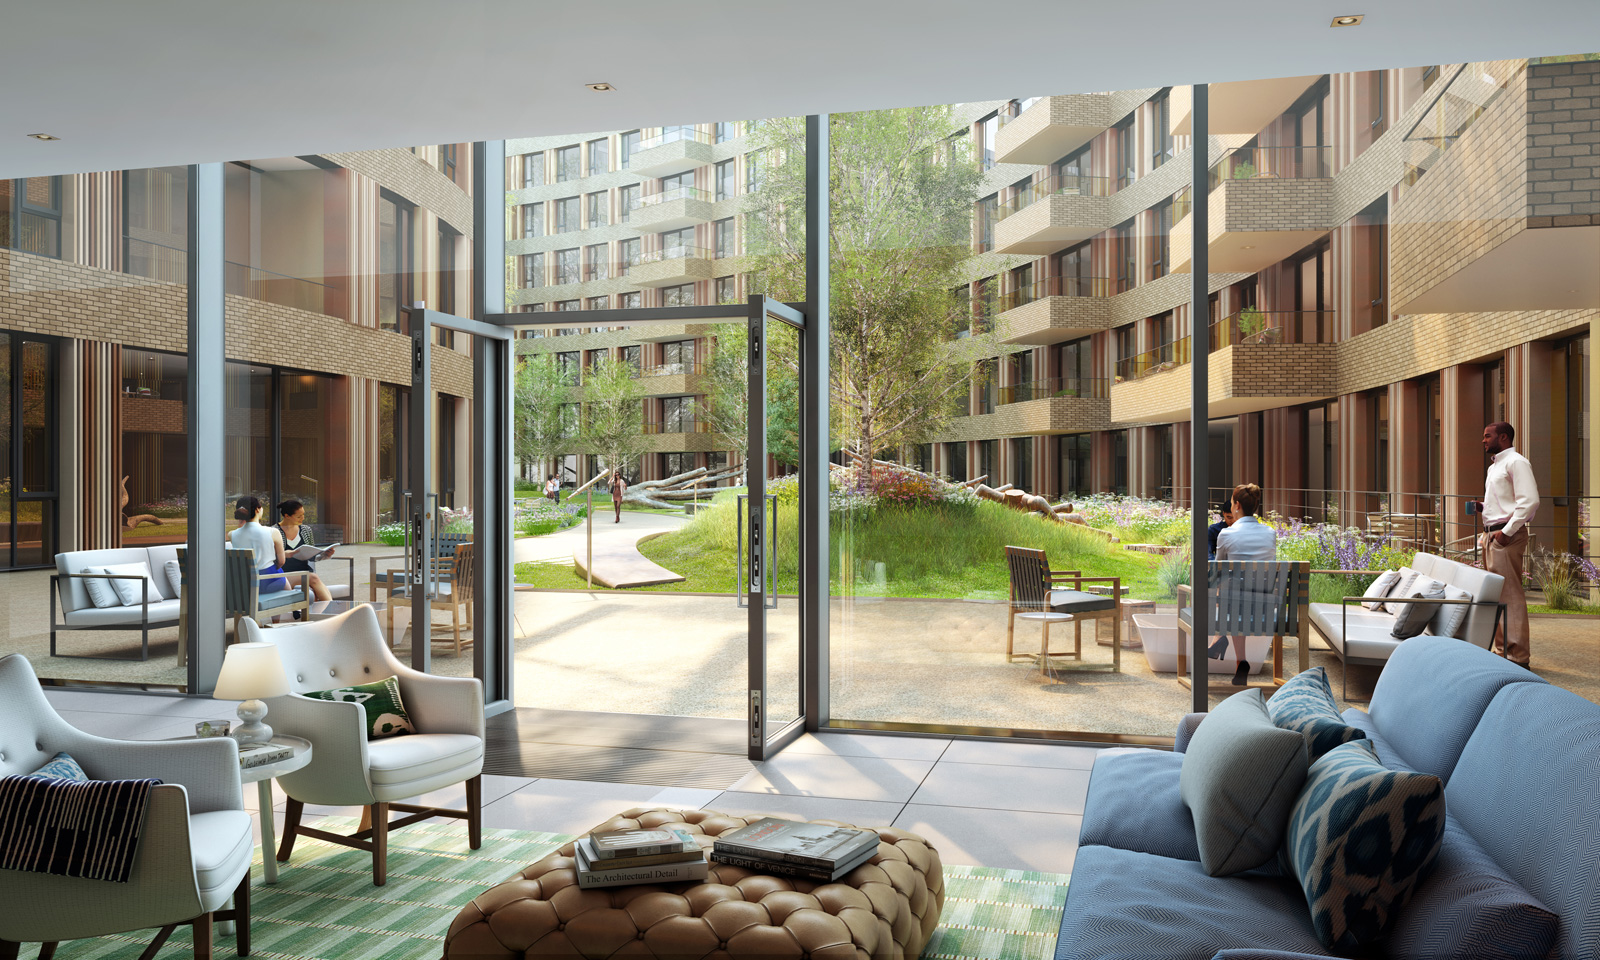 Render of the Television Centre residents' lounge and gardens, which will be landscaped by Gillespies. Courtesy of Television Centre / Stanhope